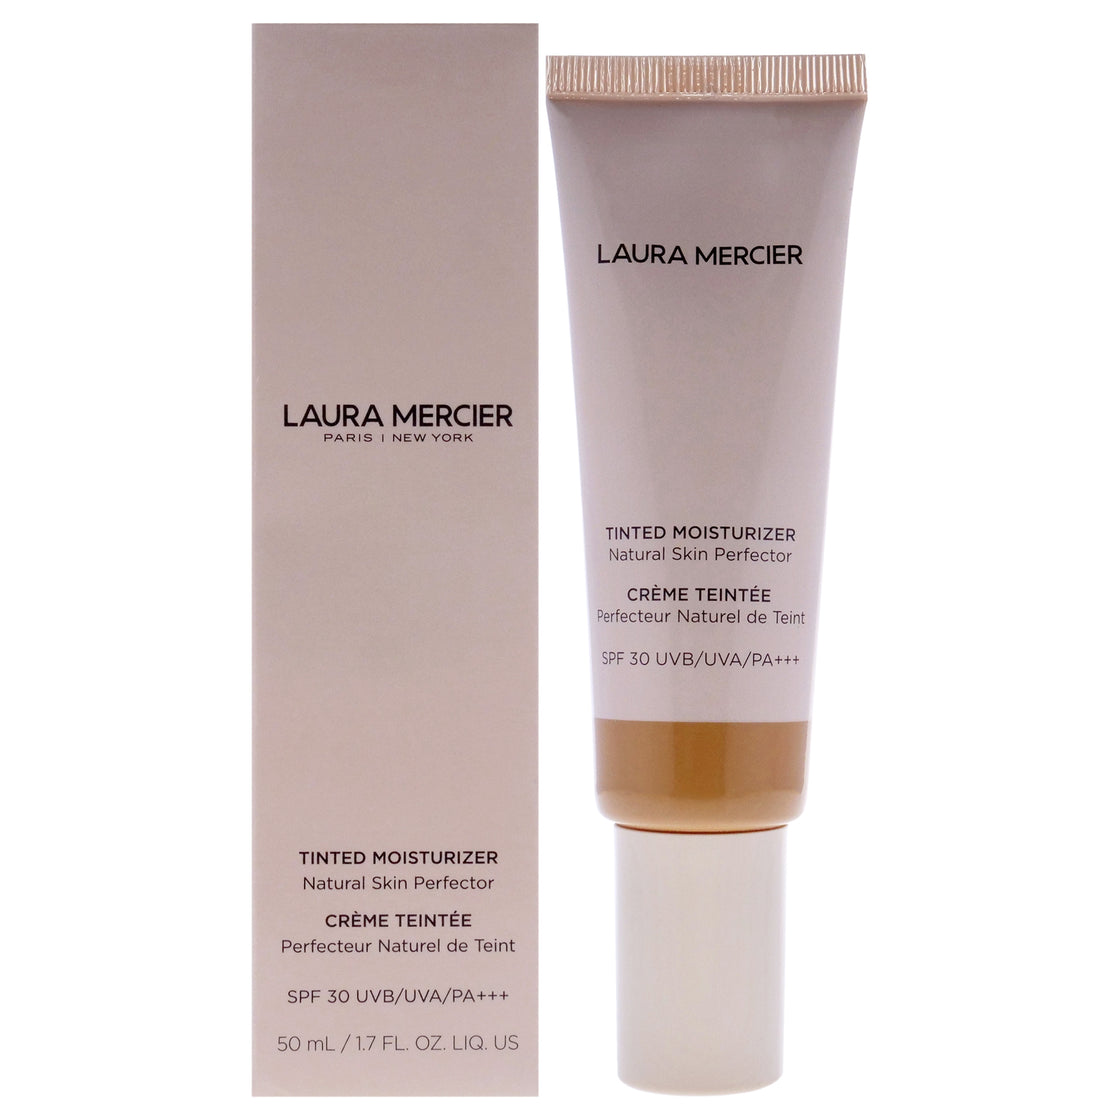 Tinted Moisturizer Natural Skin Perfector SPF 30 - 4N1 Wheat by Laura Mercier for Women - 1.7 oz Makeup